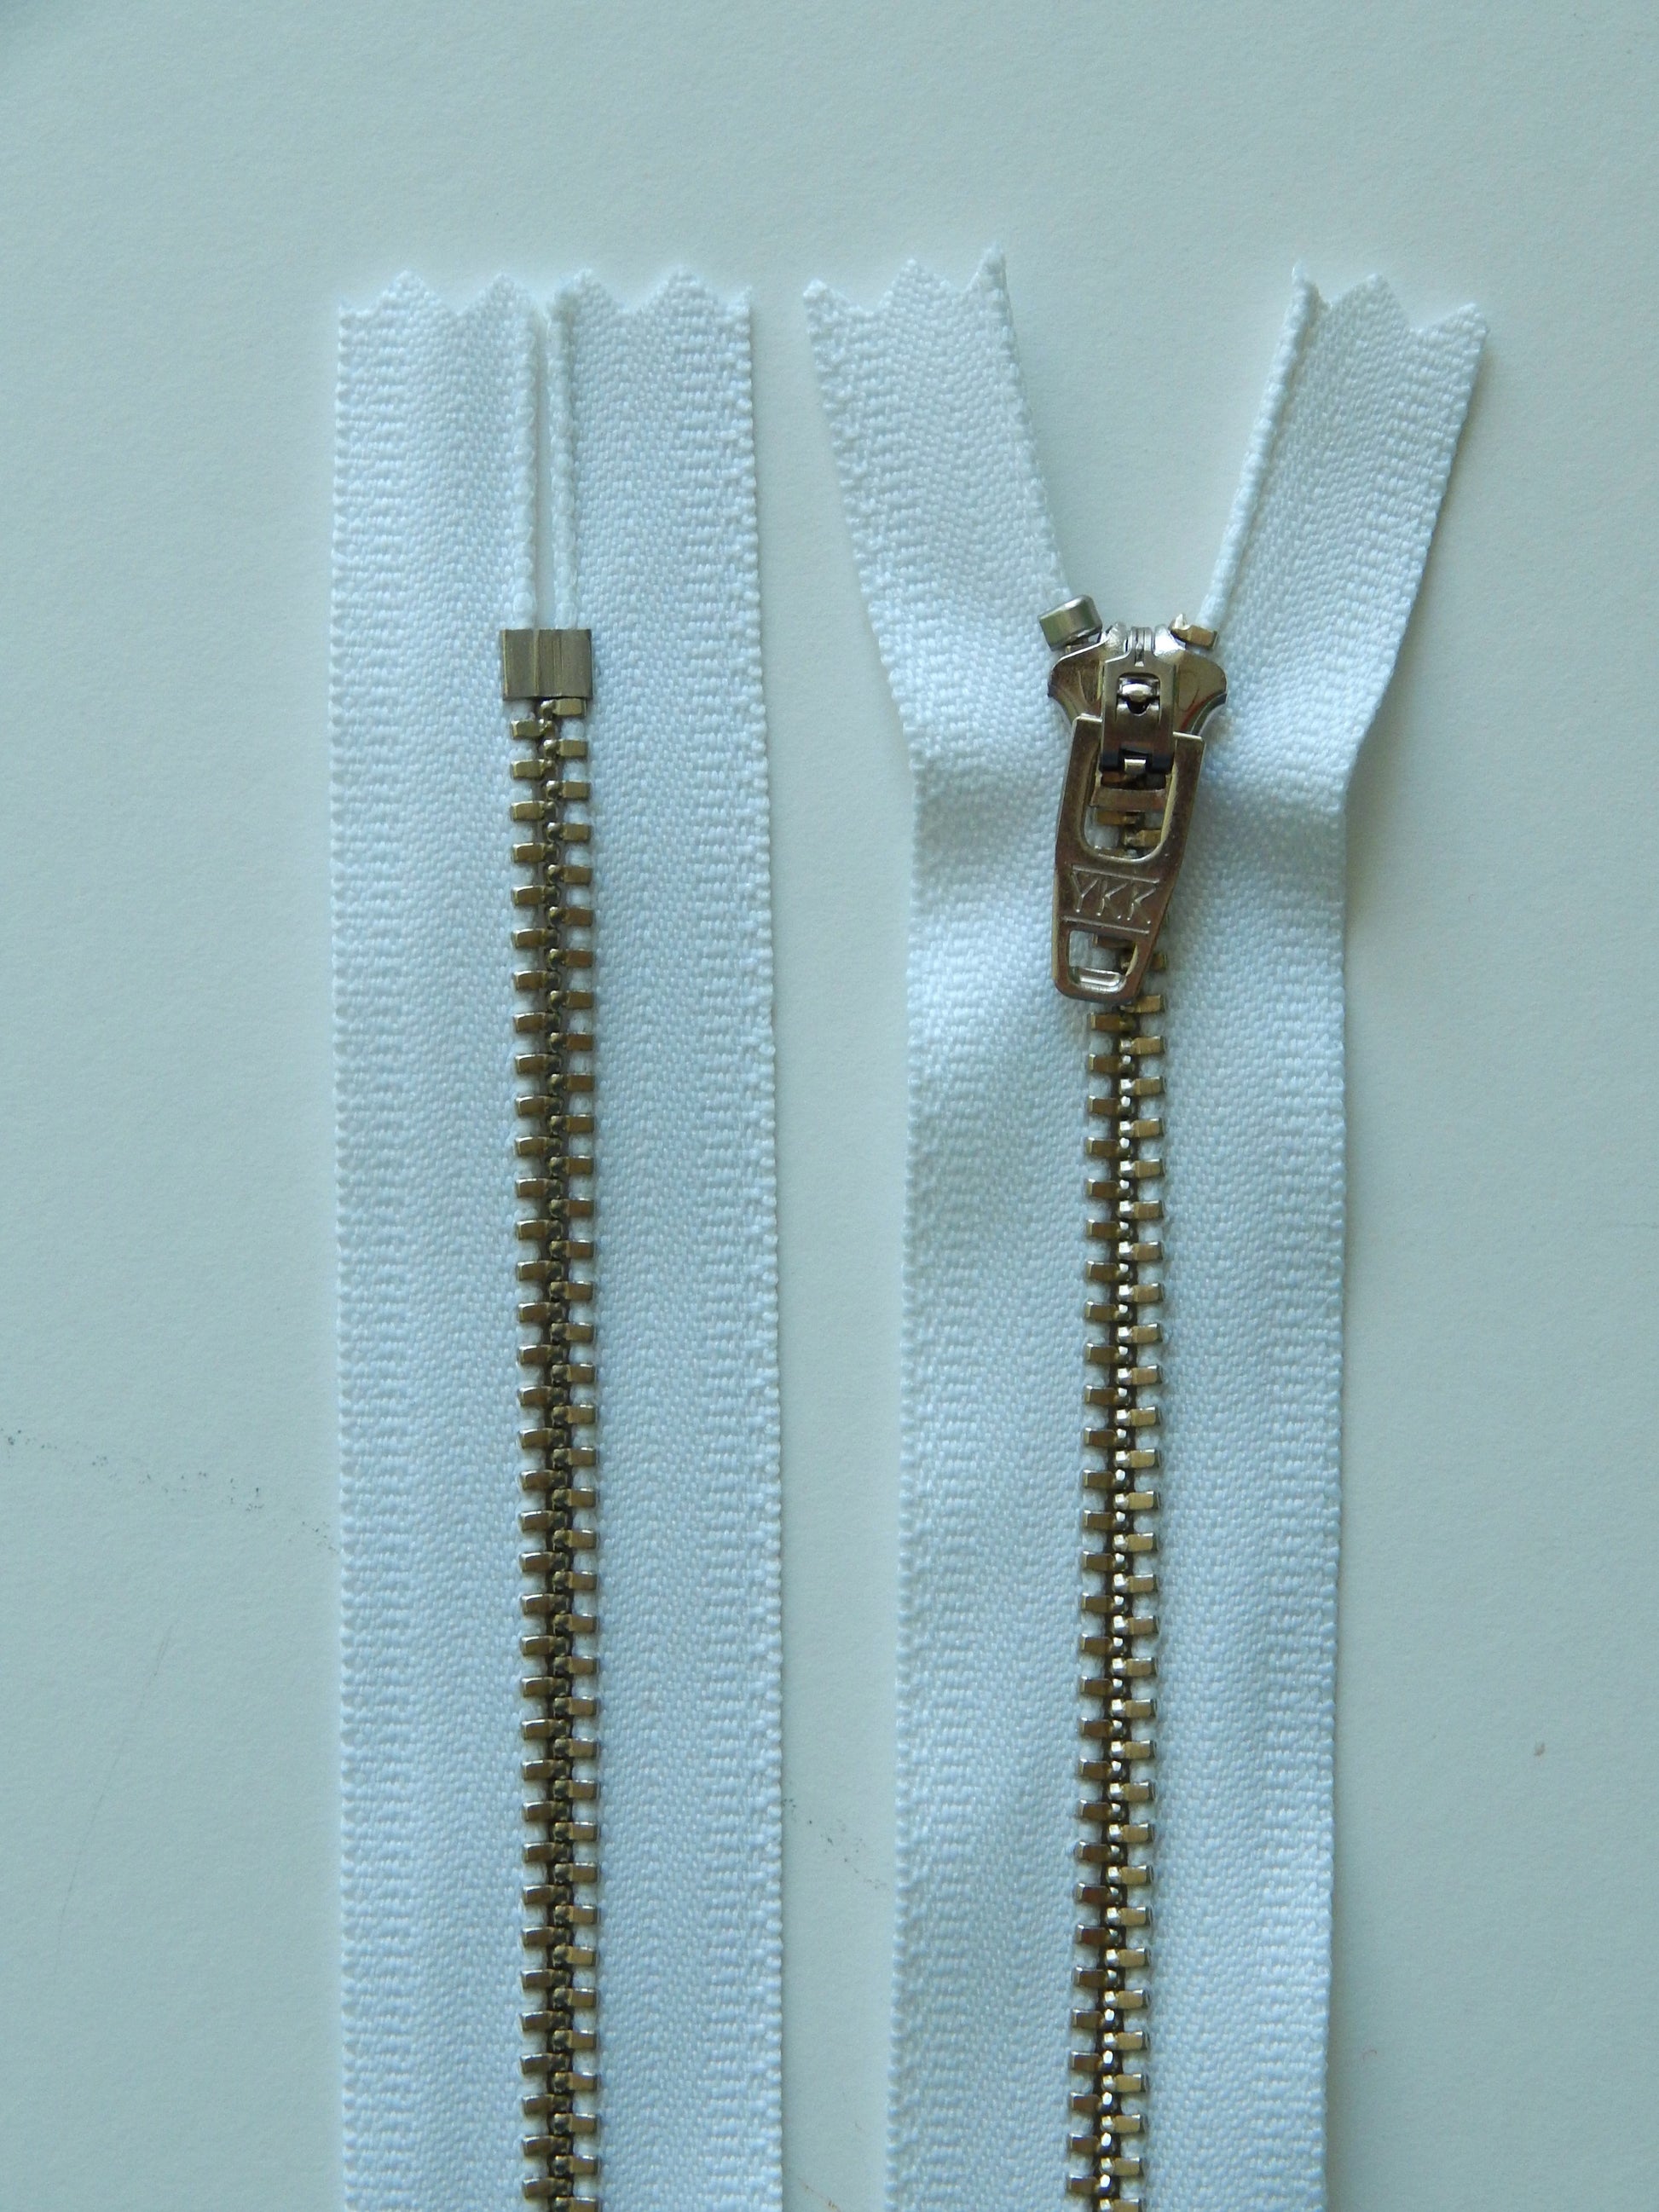 white and silver metal nonseparating pant zipper